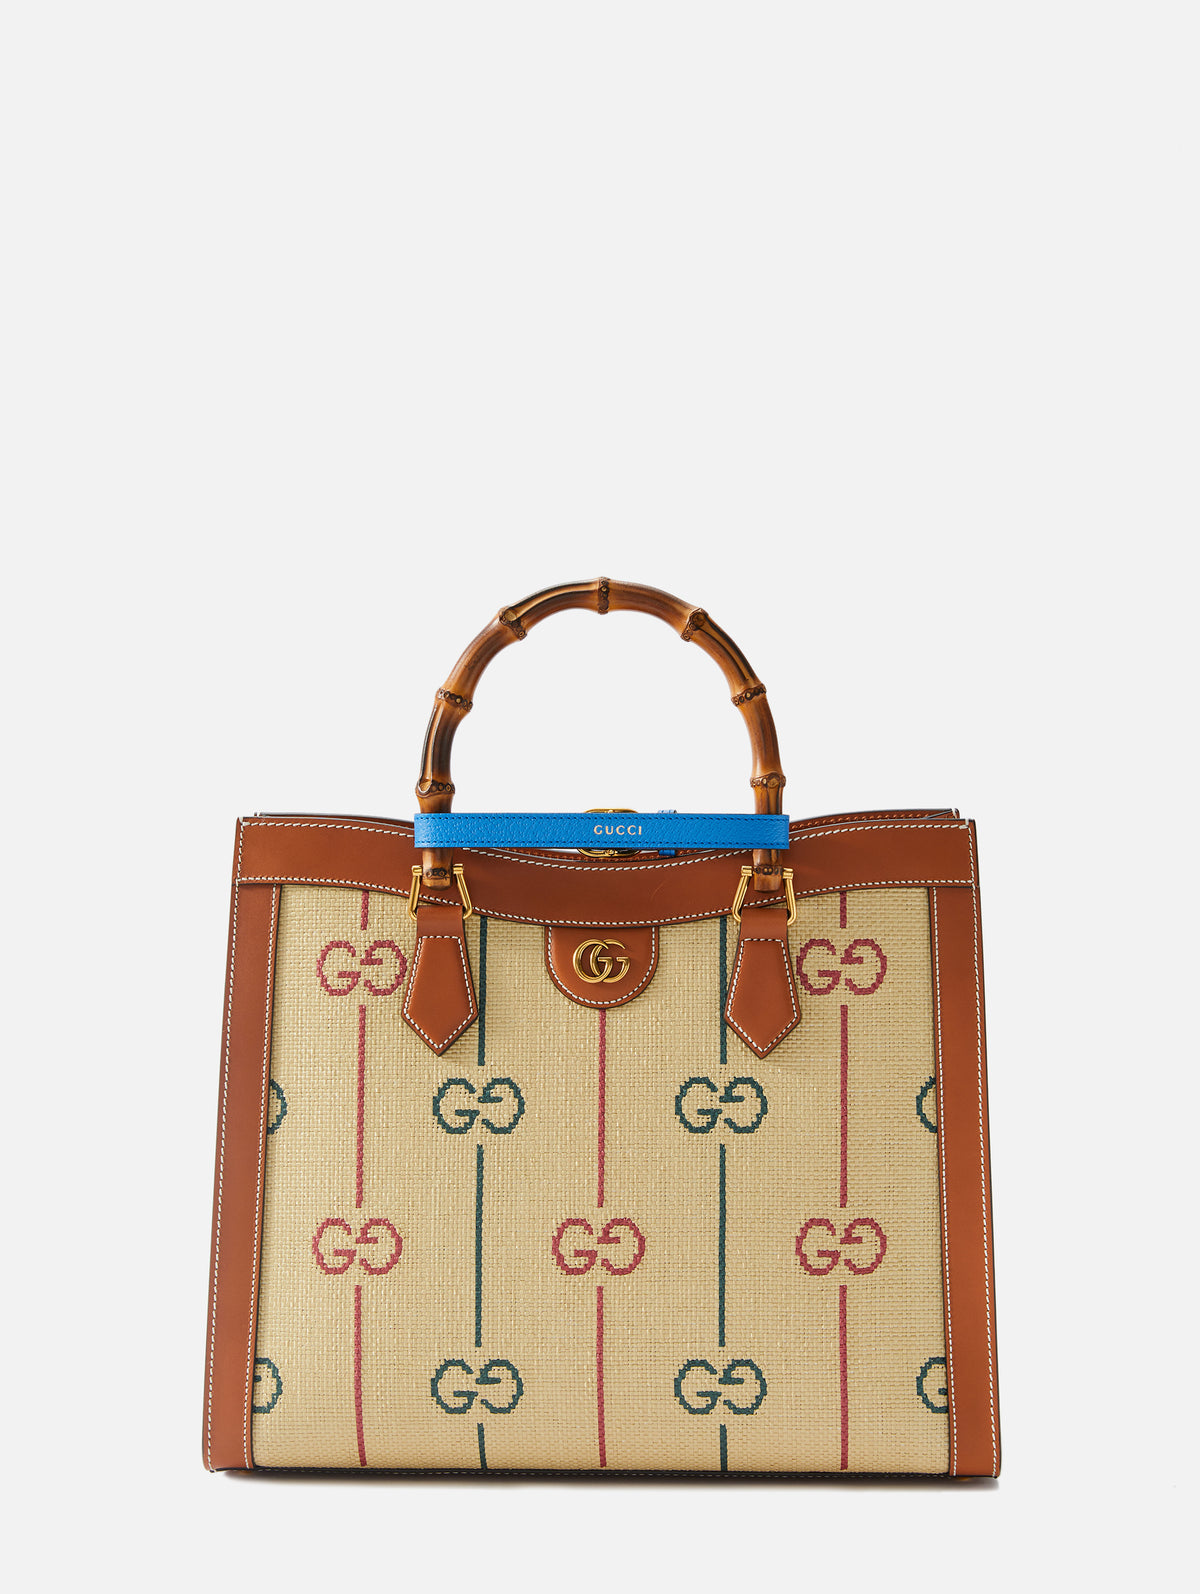 Buy Gucci Messenger Bags & Crossbody Bags online - 71 products